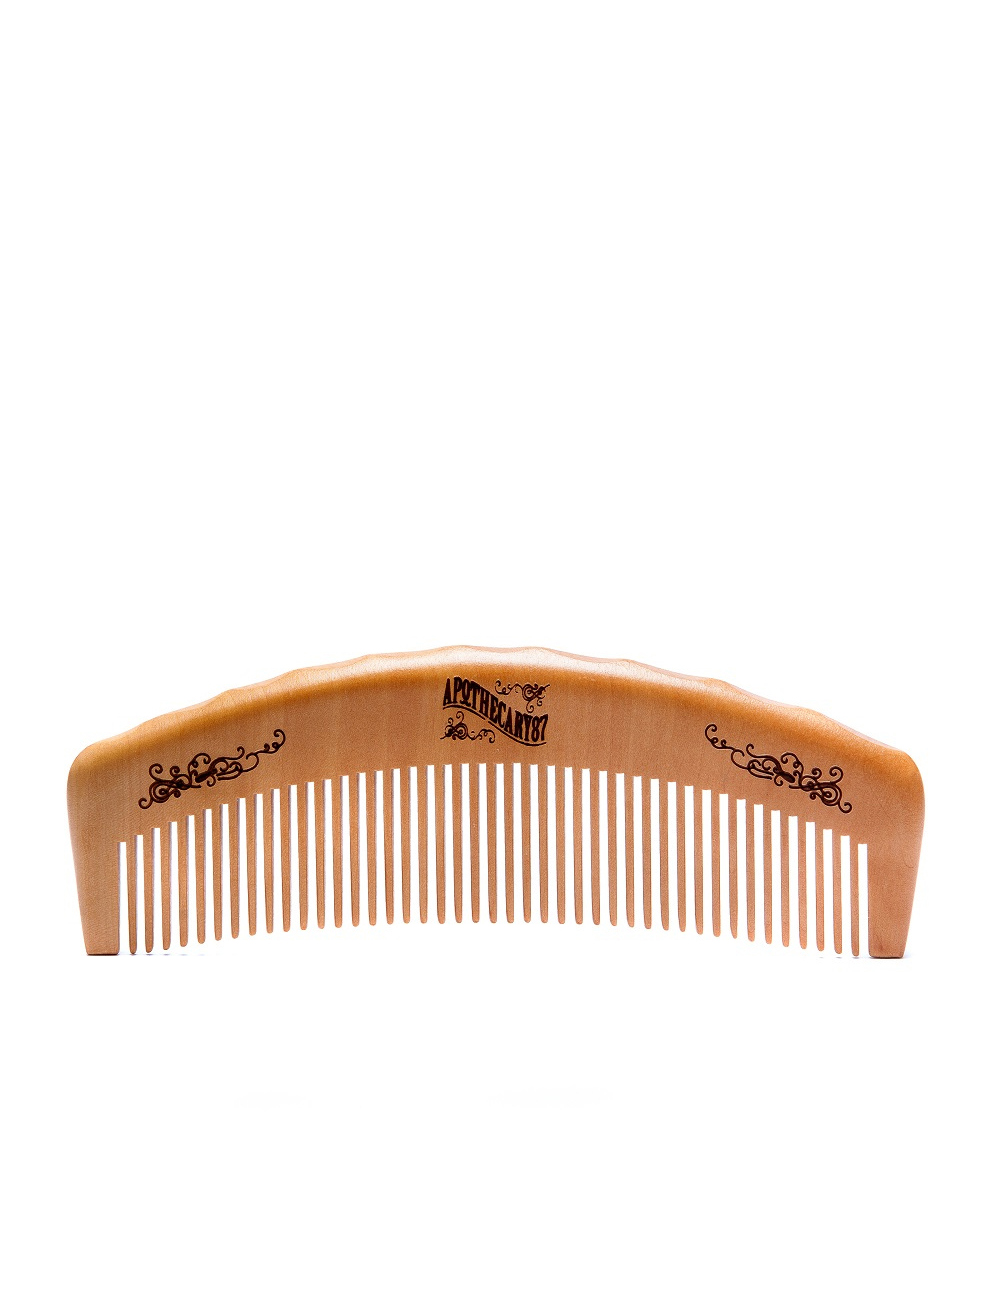 Apothecary 87 Club Barber Comb